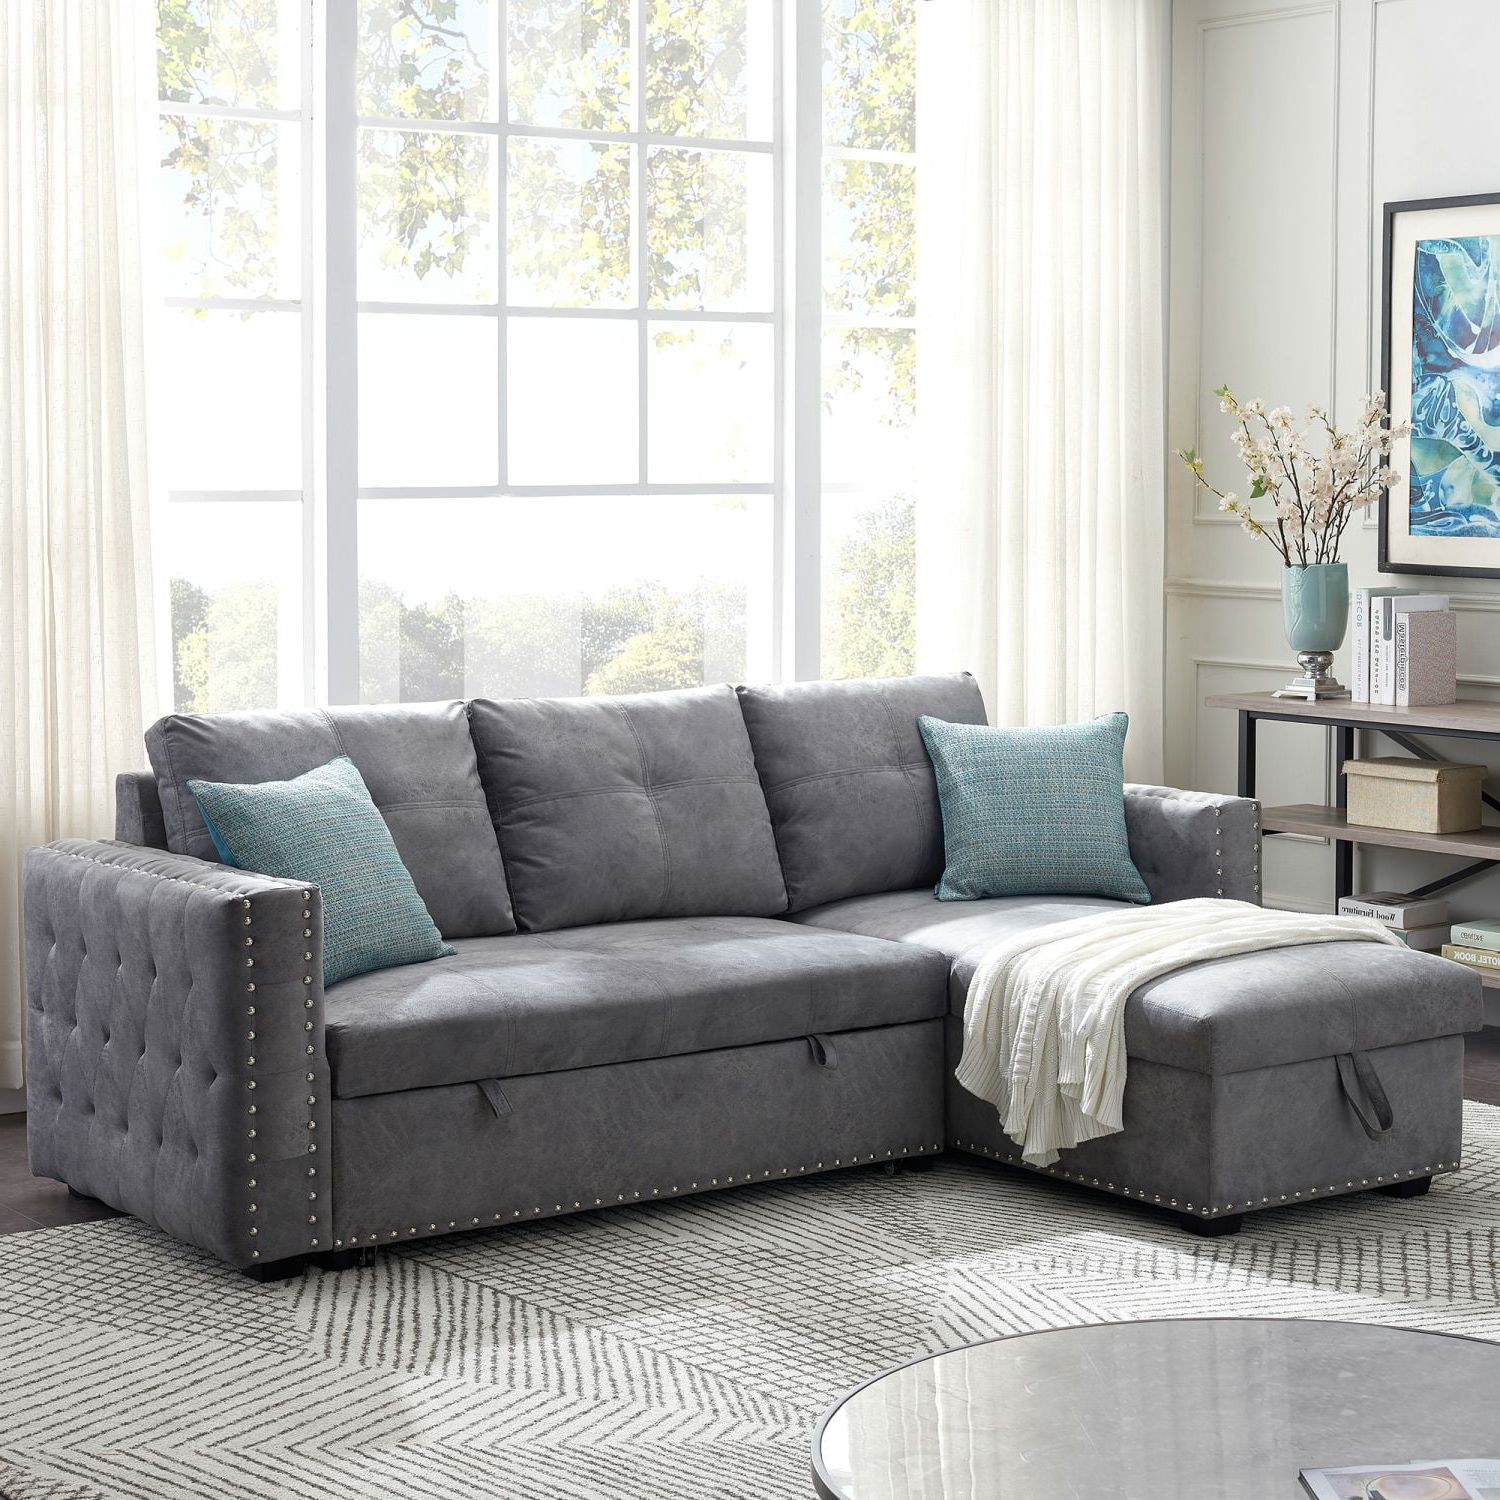 91" Reversible Sleeper Sectional Sofa,corner Sofa Bed With Storage And In 3 Seat Convertible Sectional Sofas (View 14 of 20)